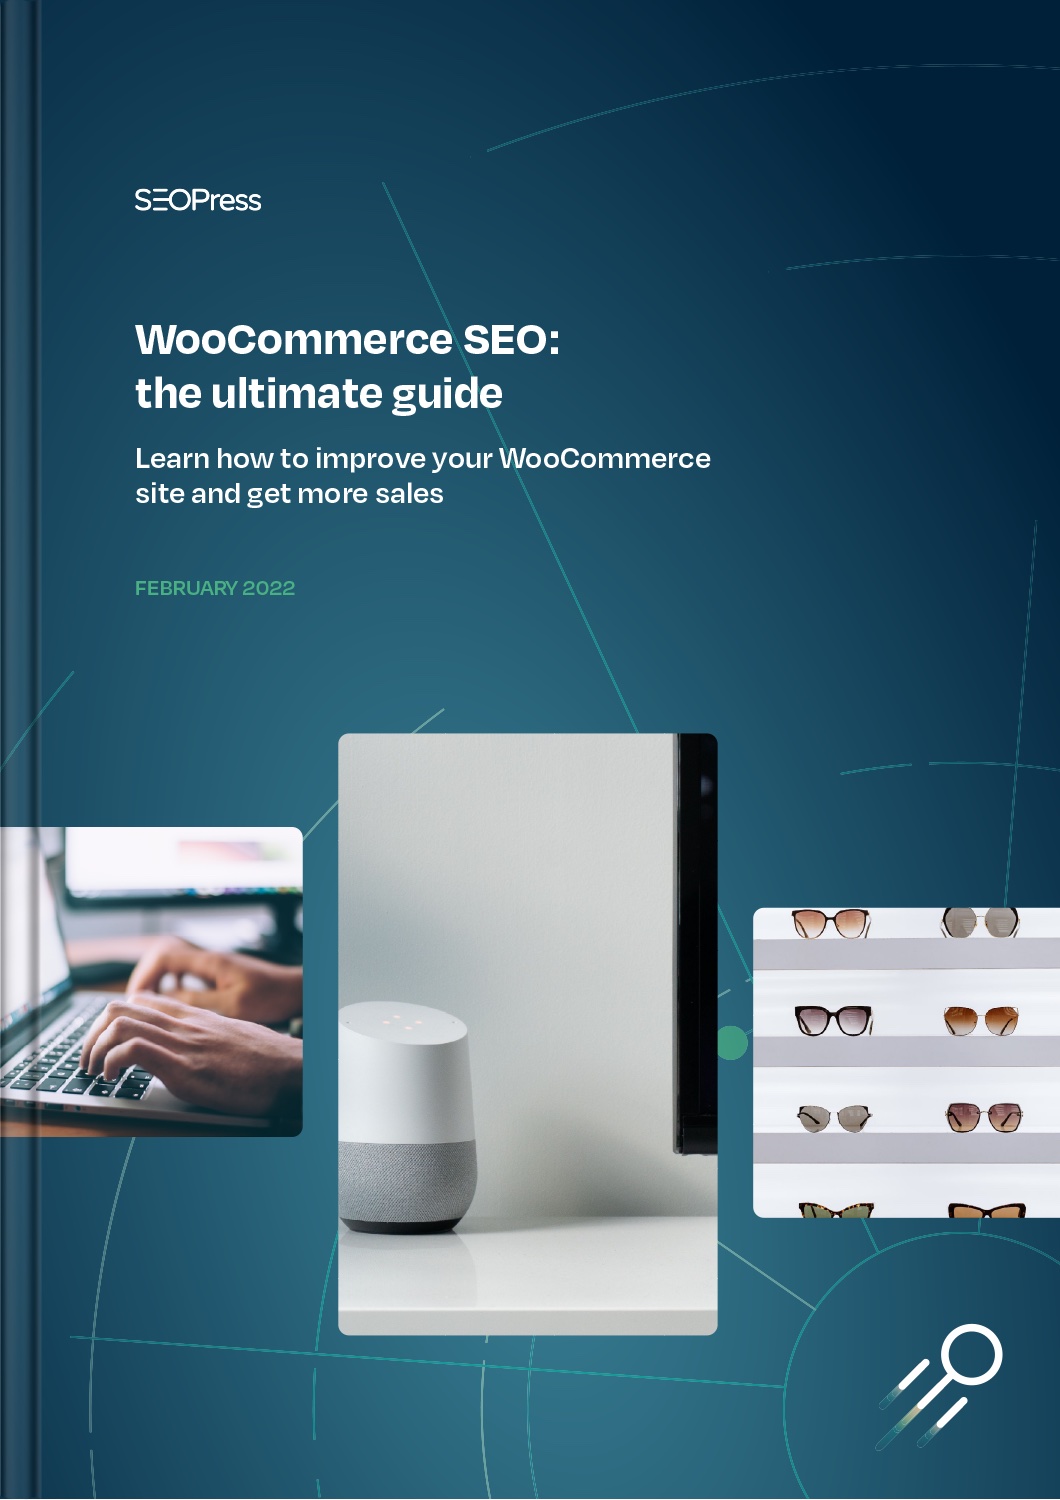 WooCommerce SEO: the ultimate guide